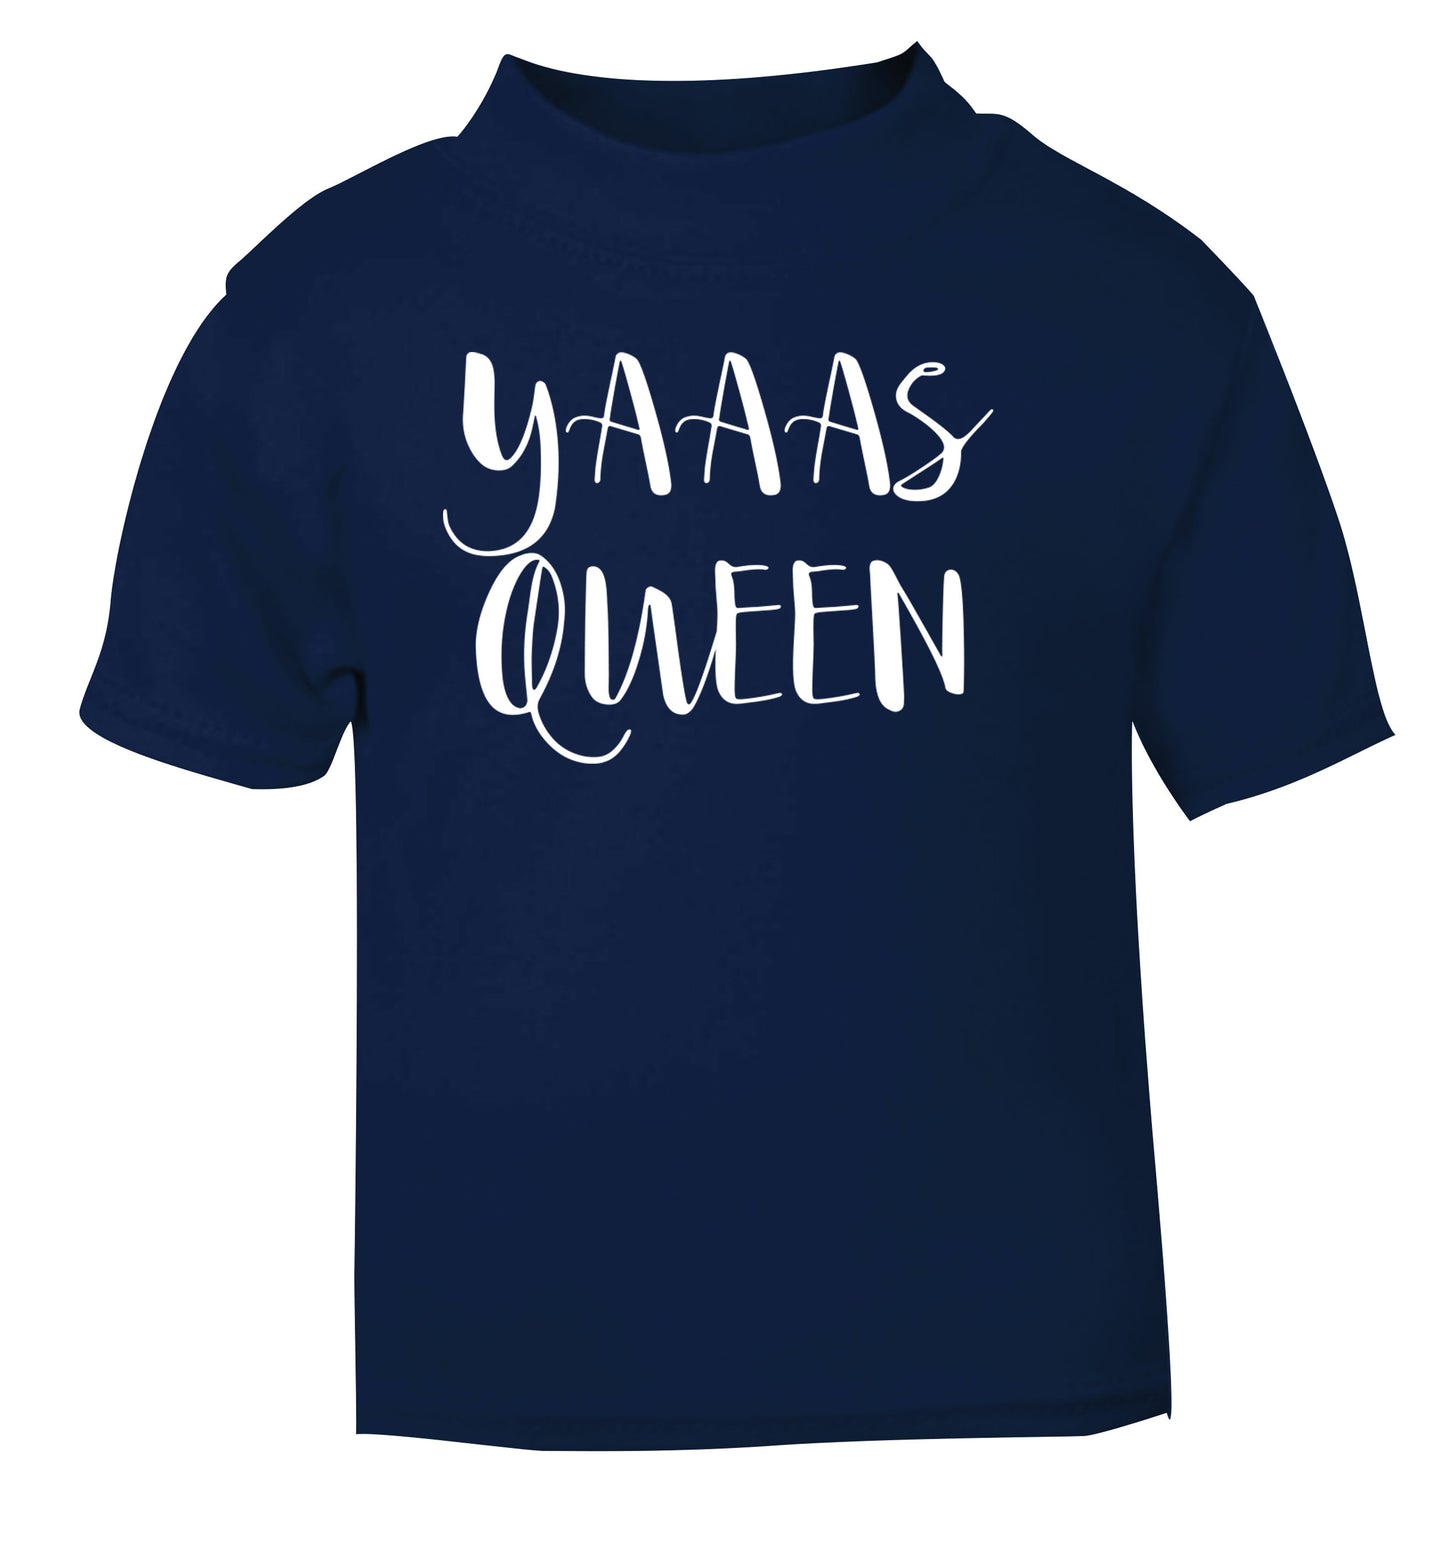 Yas Queen navy Baby Toddler Tshirt 2 Years